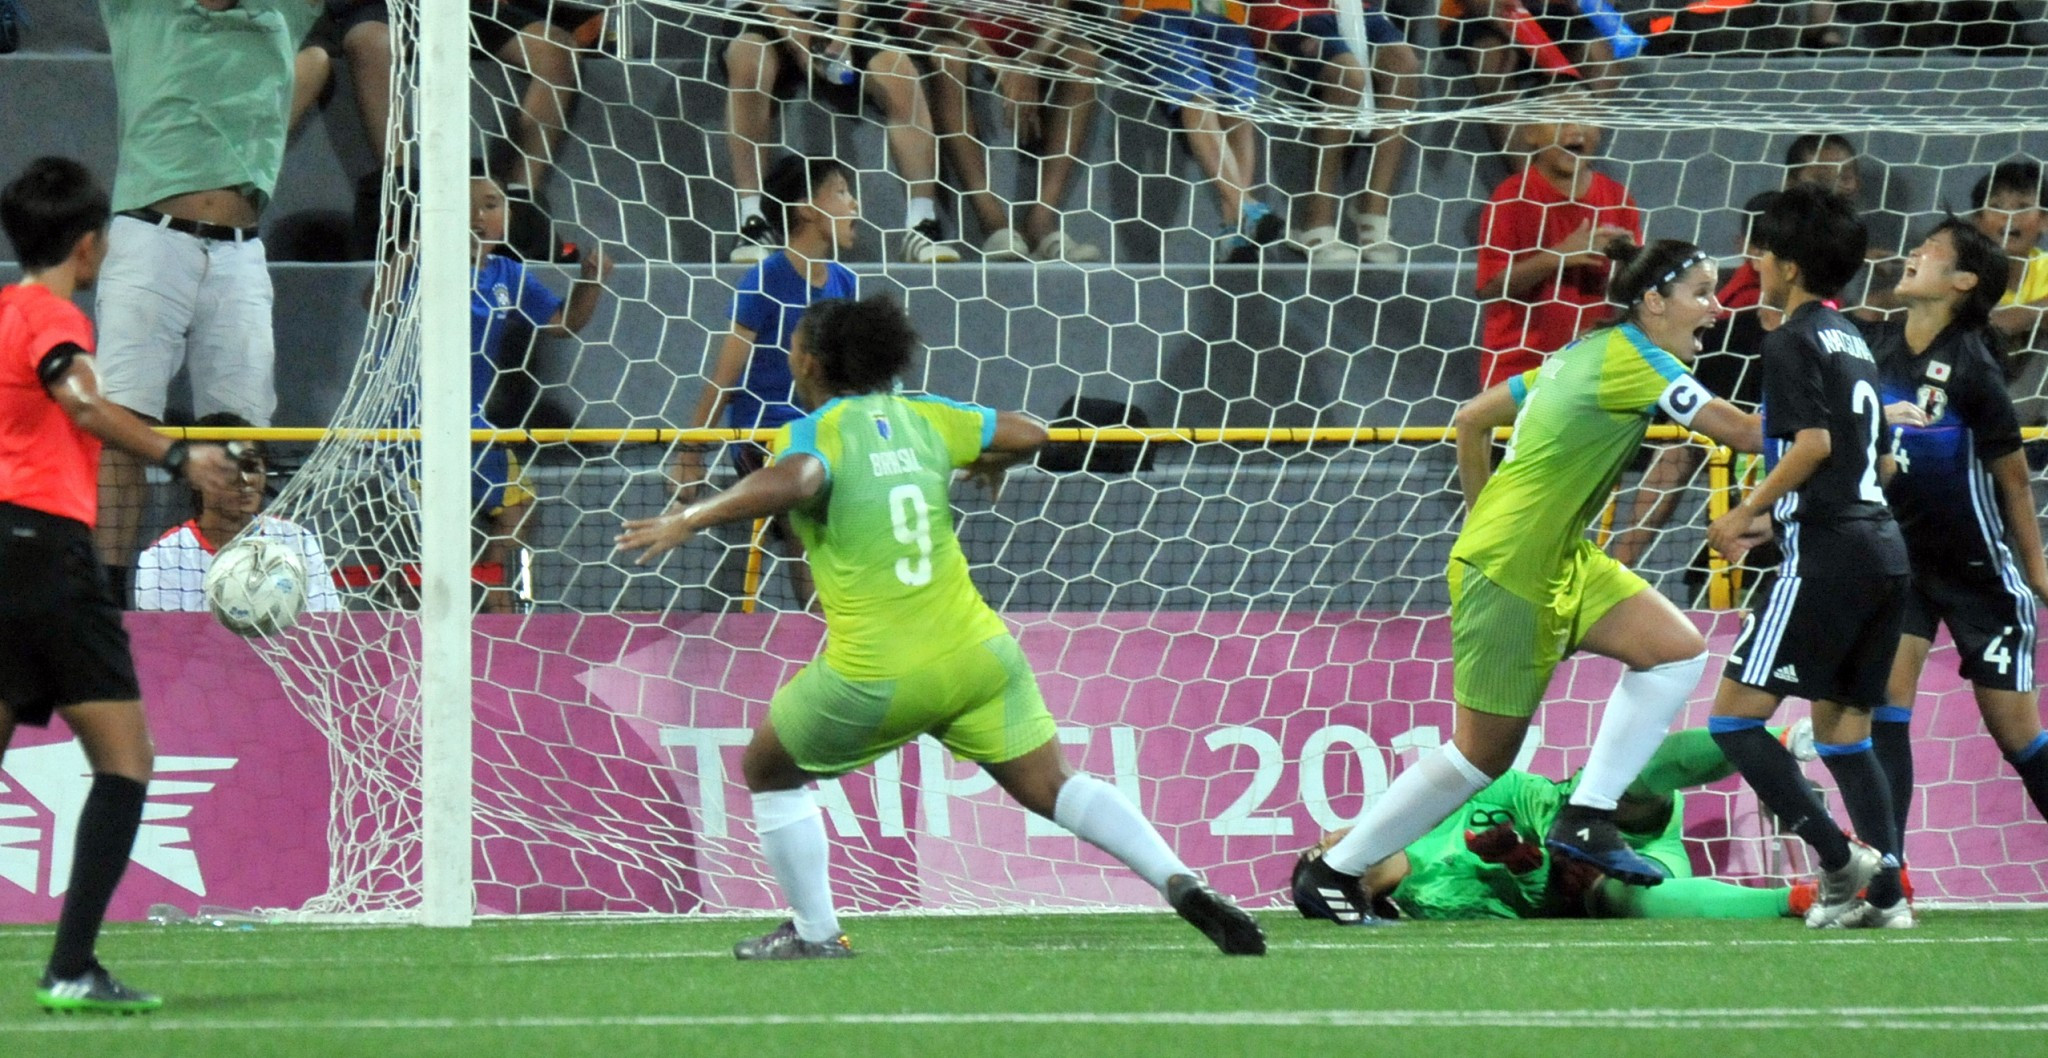 Diany Aparecida Martins scored the winner for Brazil in the 112th minute ©Taipei 2017